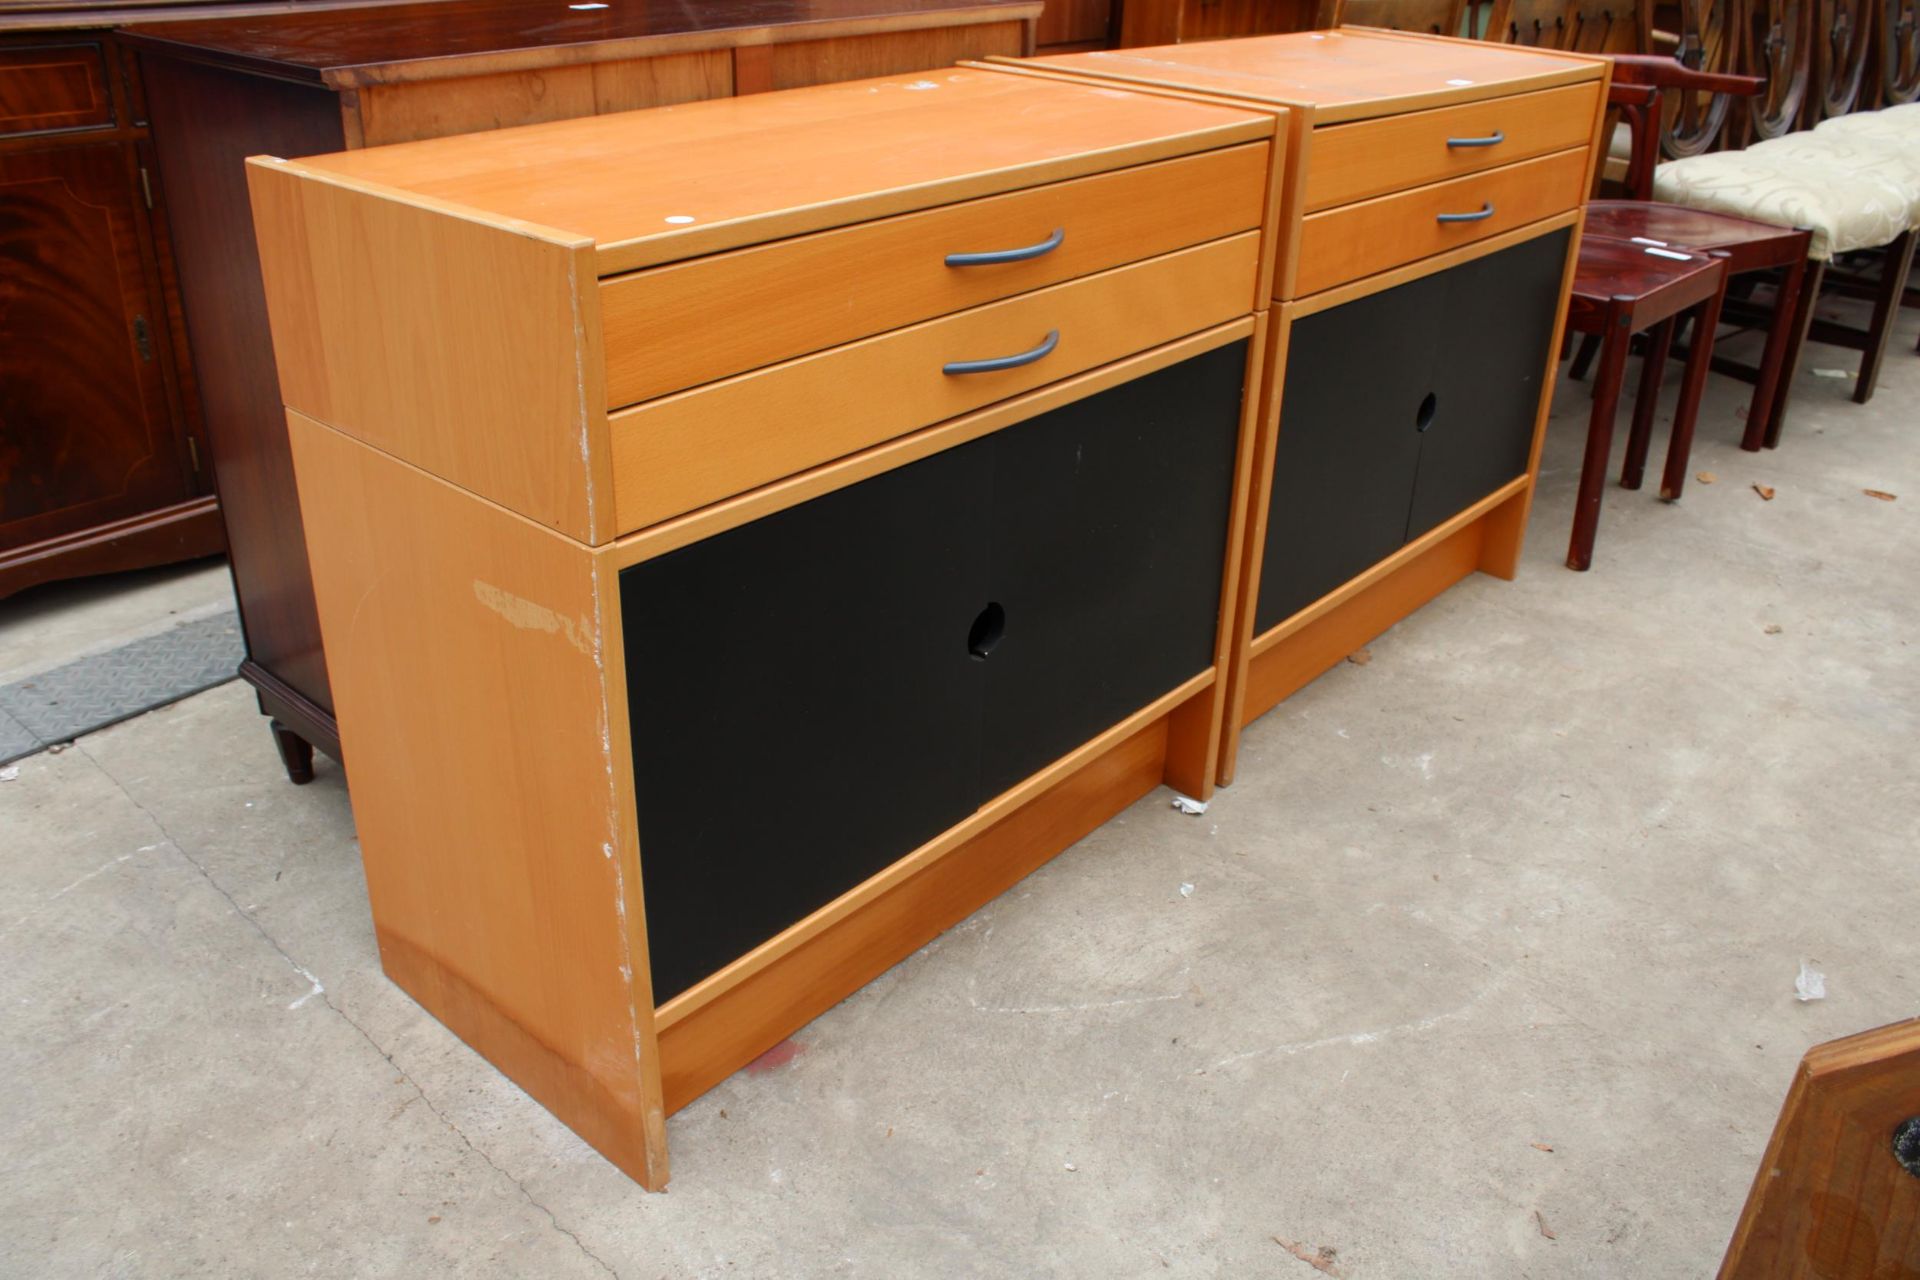 A PAIR OF TEAK SIDE CABINETS WITH PAINTED DOORS - Image 2 of 3